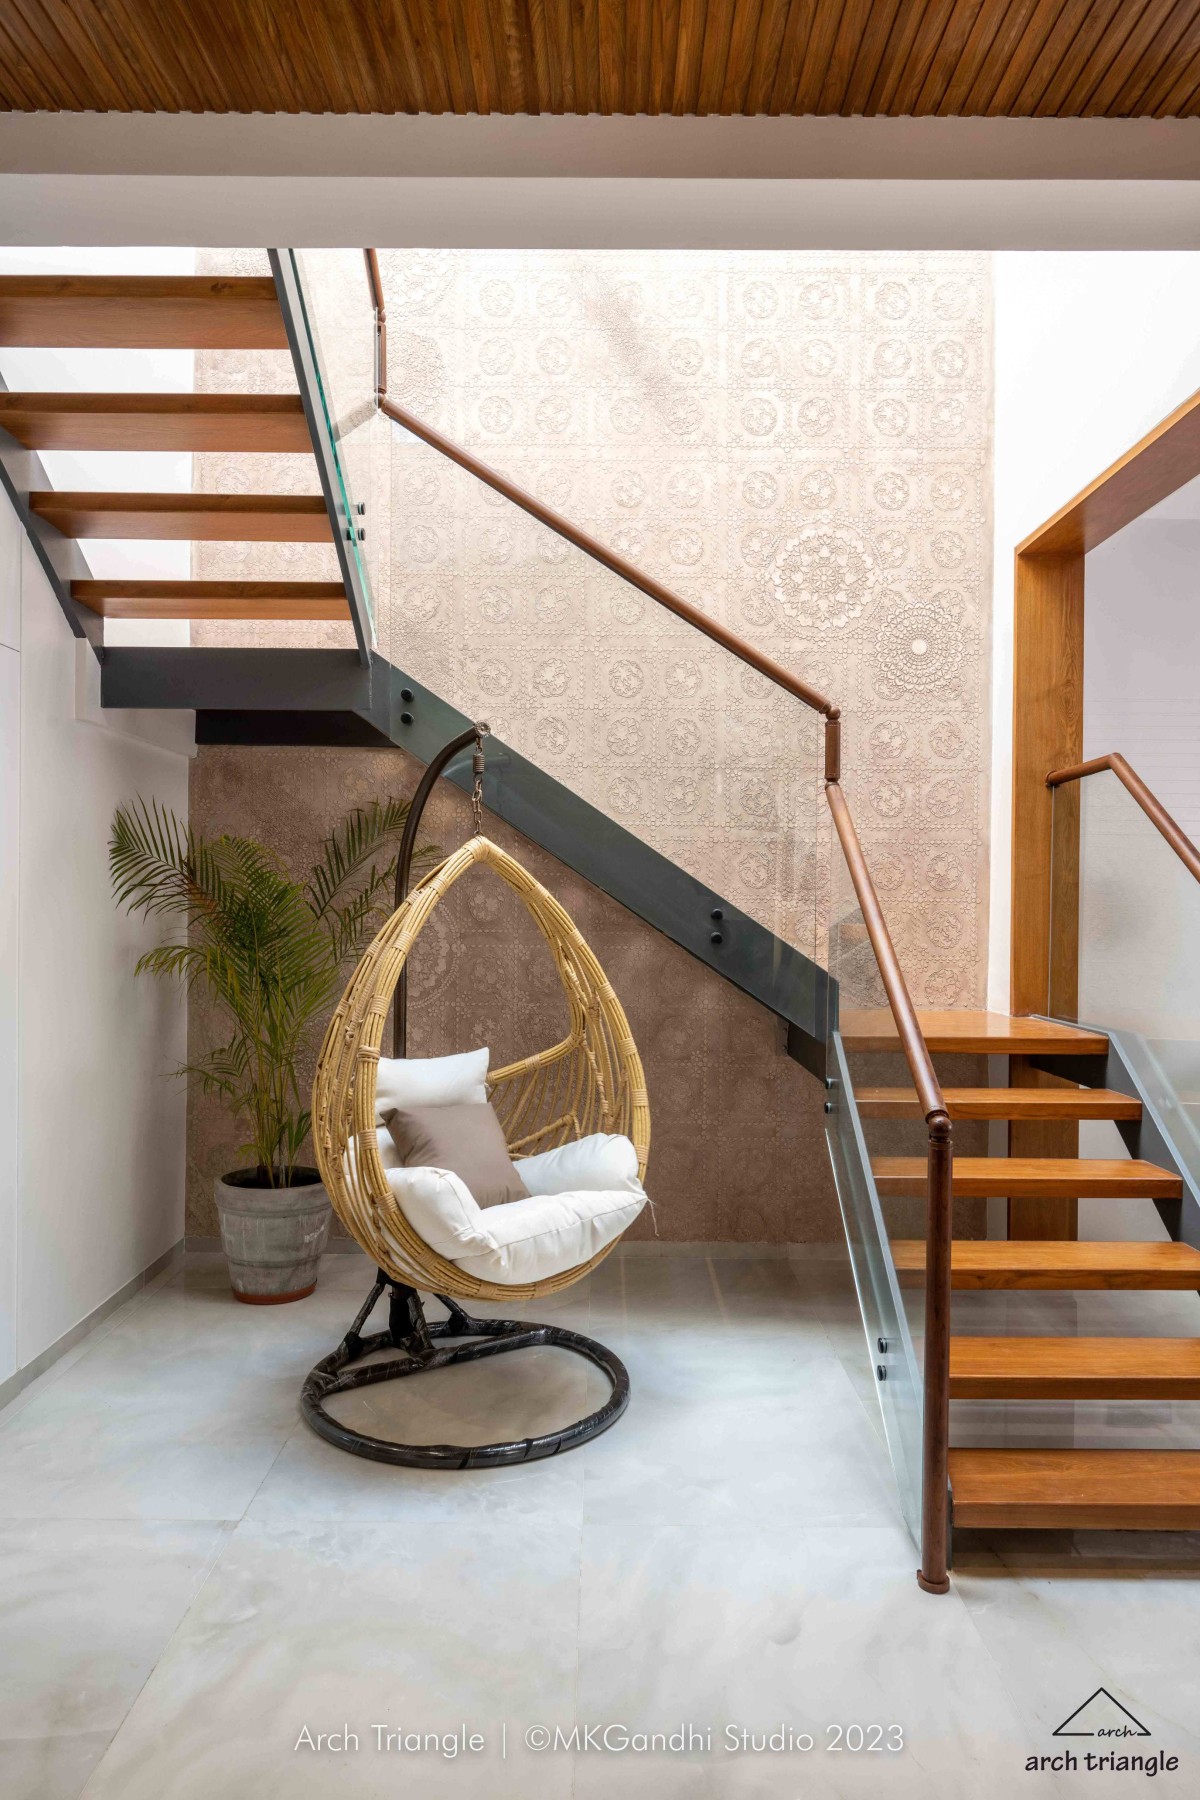 Staircase of Jiruwala Residence by Arch Triangle